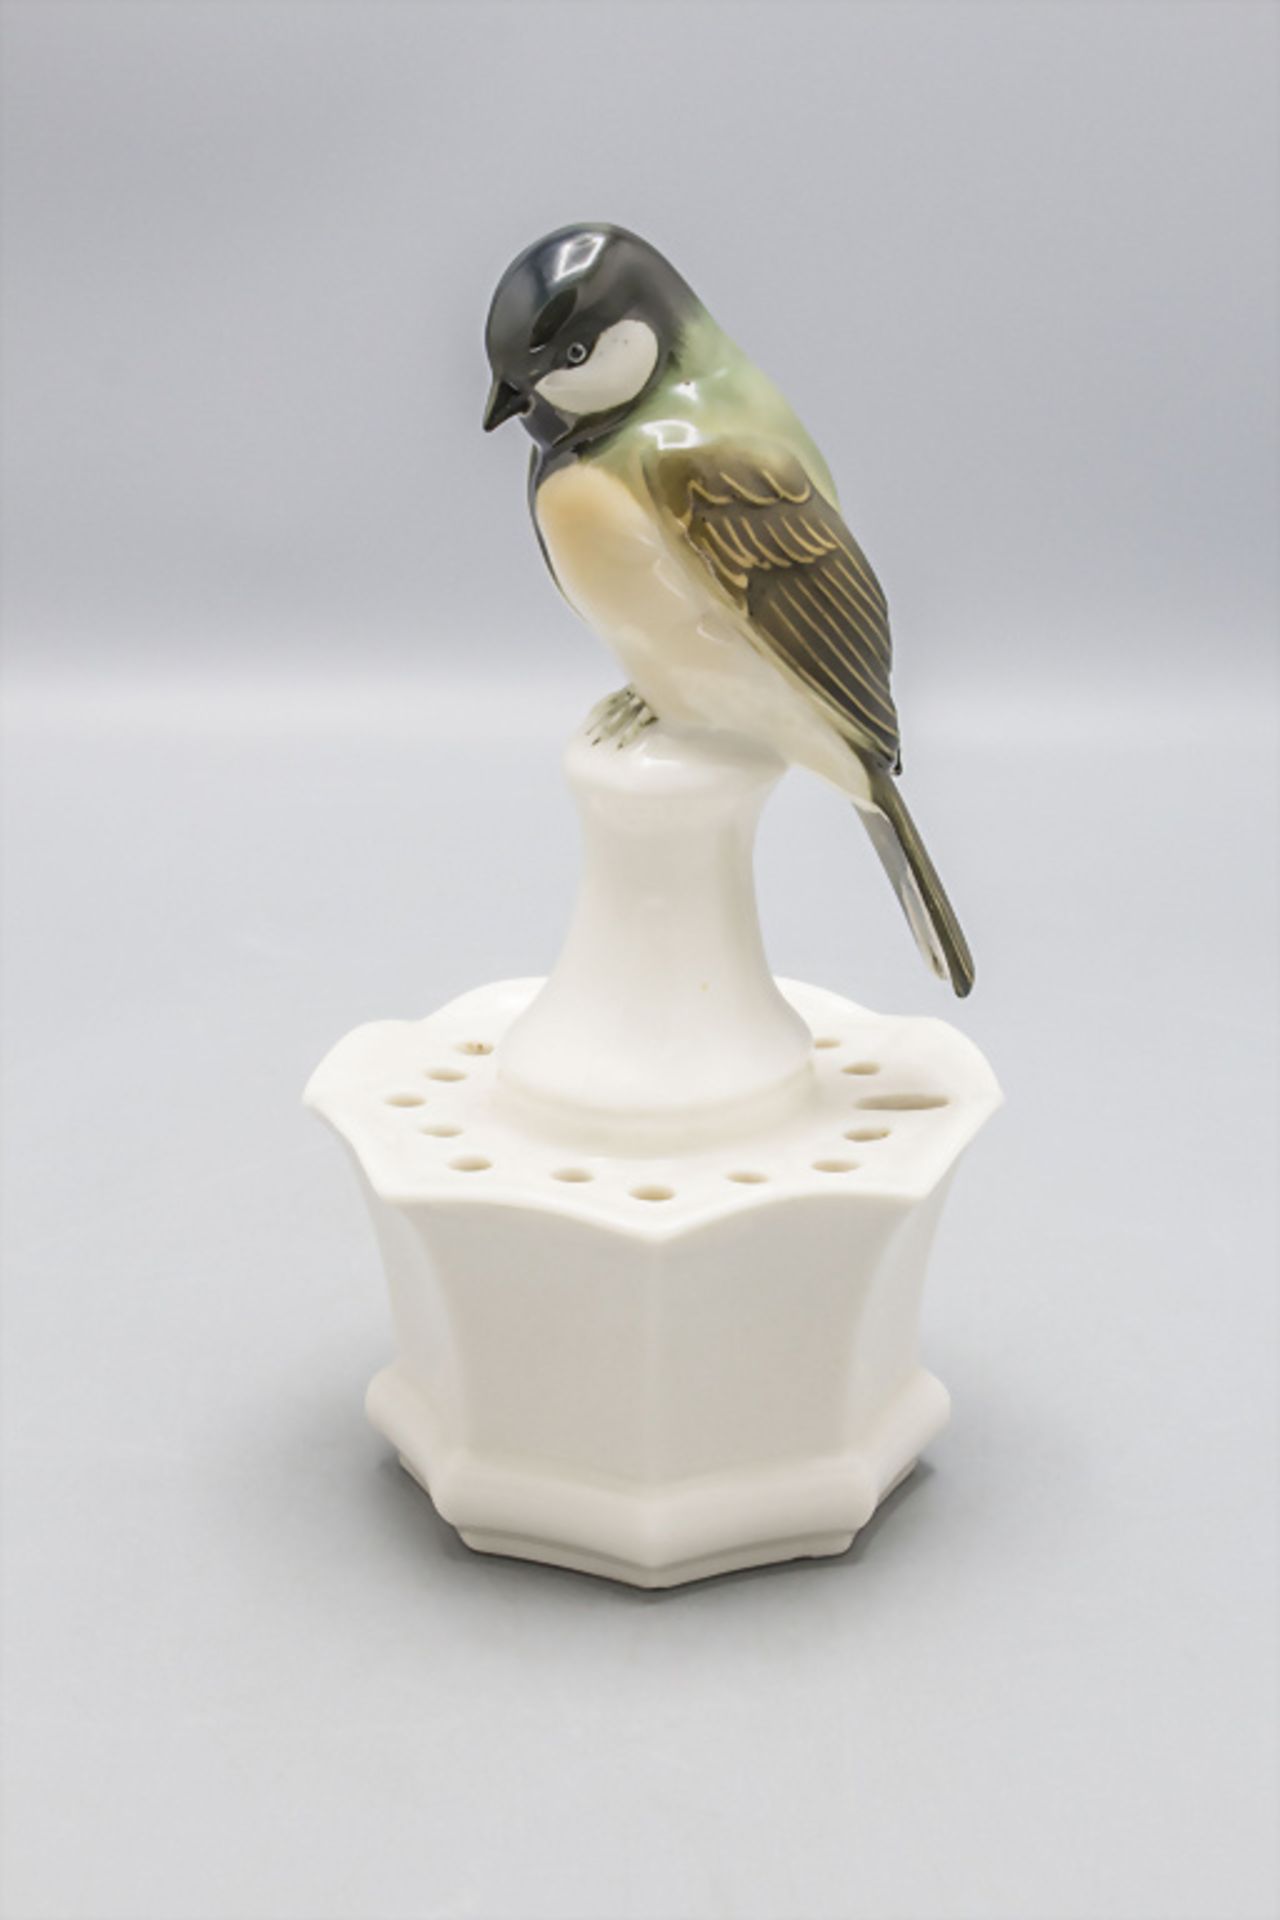 Kohlmeise auf Postament / Blumensteckschale / A great tit on a base with holes for flowers, ... - Image 2 of 5